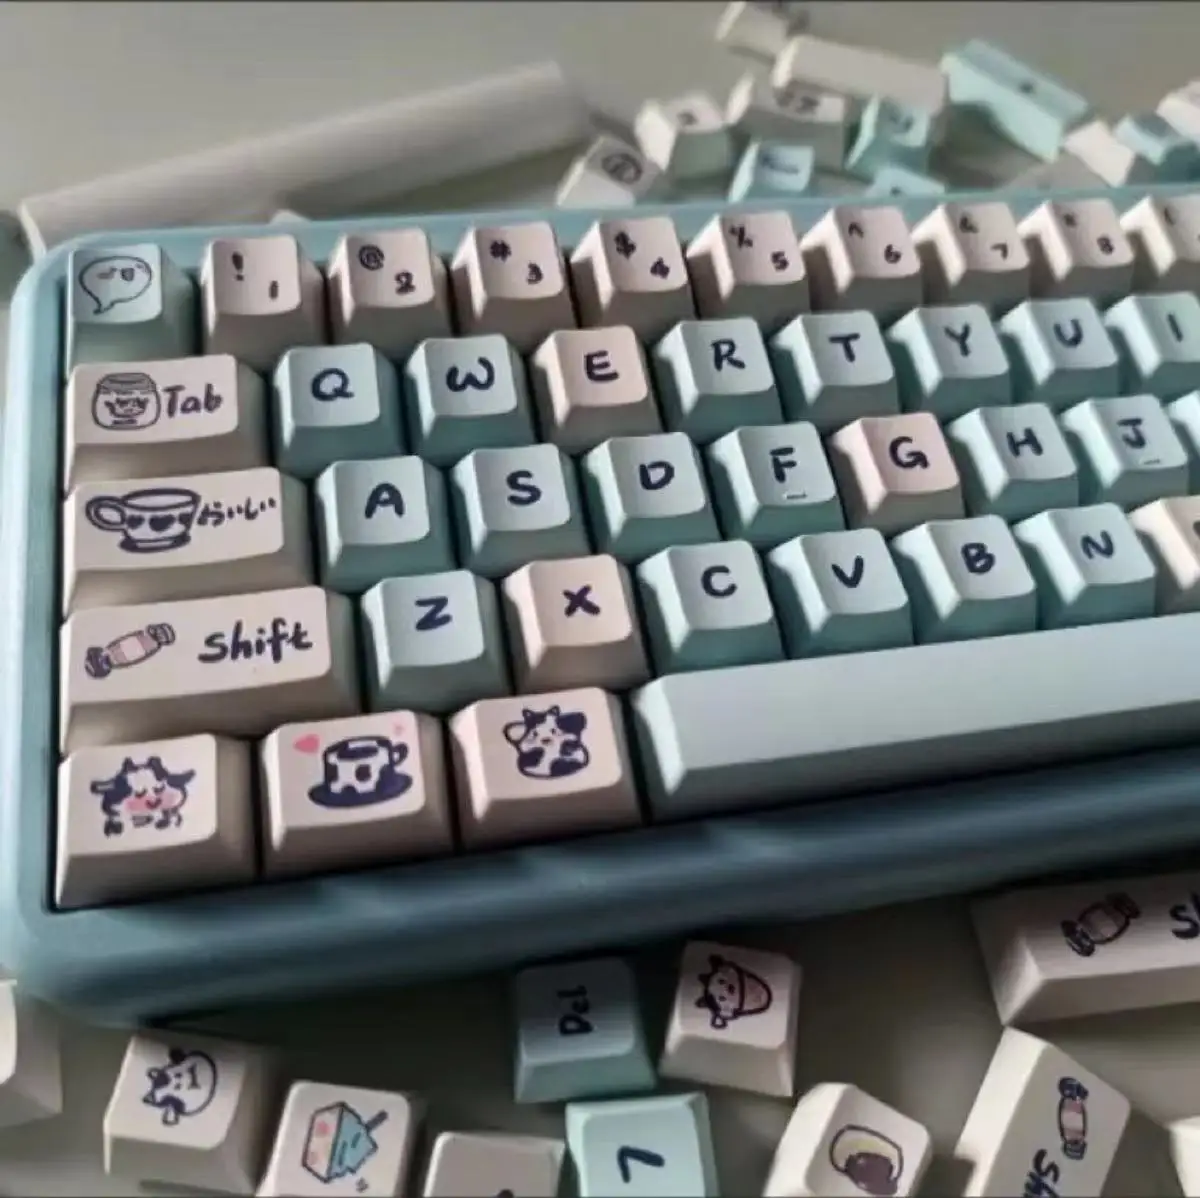 

Pbt Keycaps 130 Keys Cherry Height Candy Patterned Keycaps Combination Of Light Blue And White Keycaps For Mechanical Keyboard